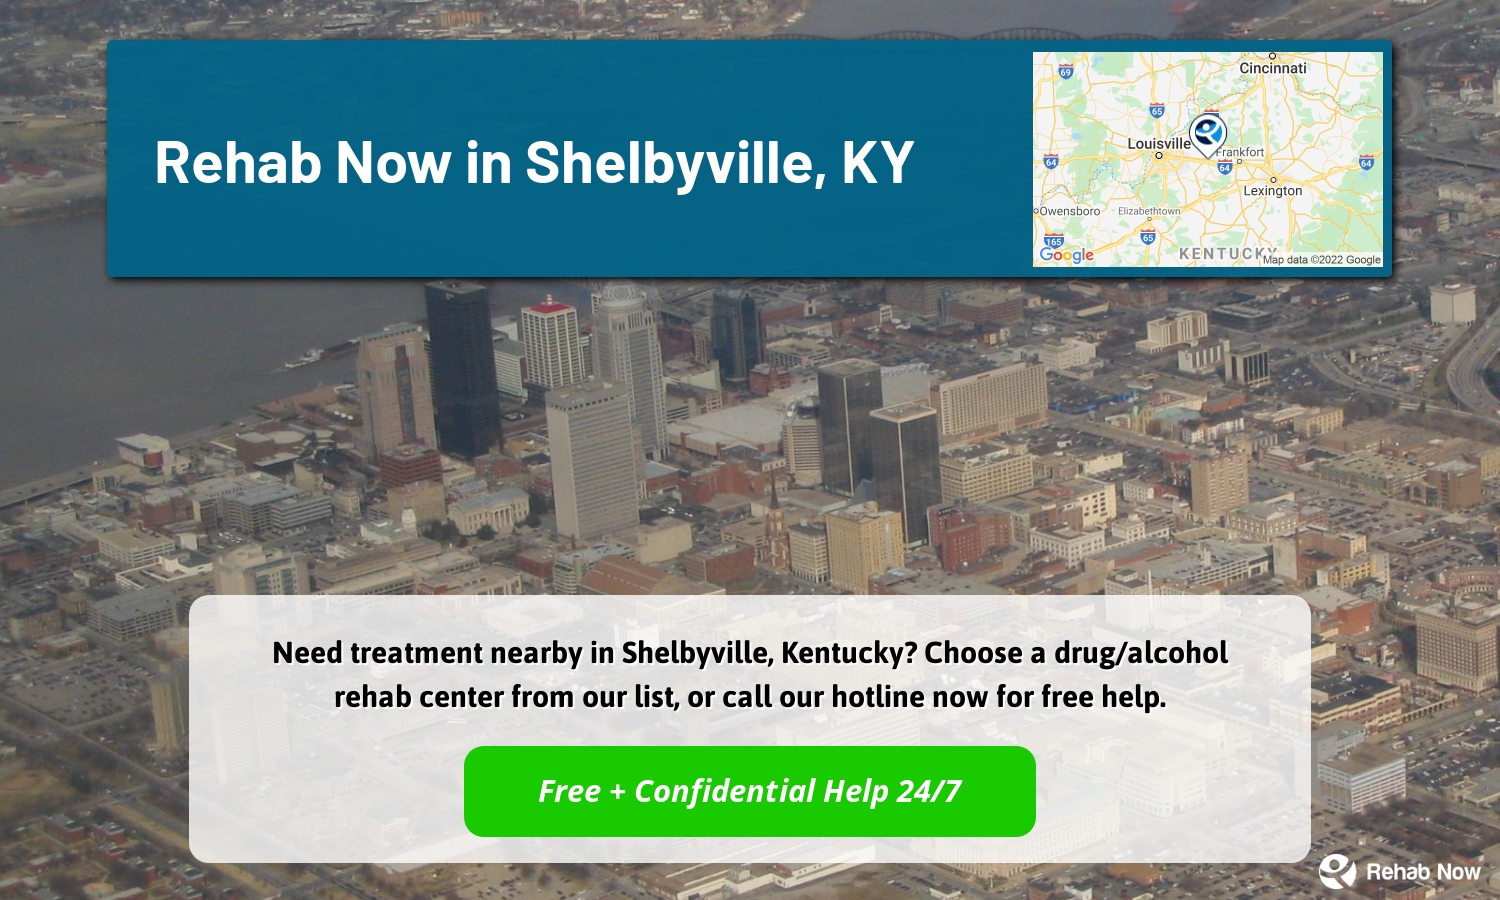 Need treatment nearby in Shelbyville, Kentucky? Choose a drug/alcohol rehab center from our list, or call our hotline now for free help.